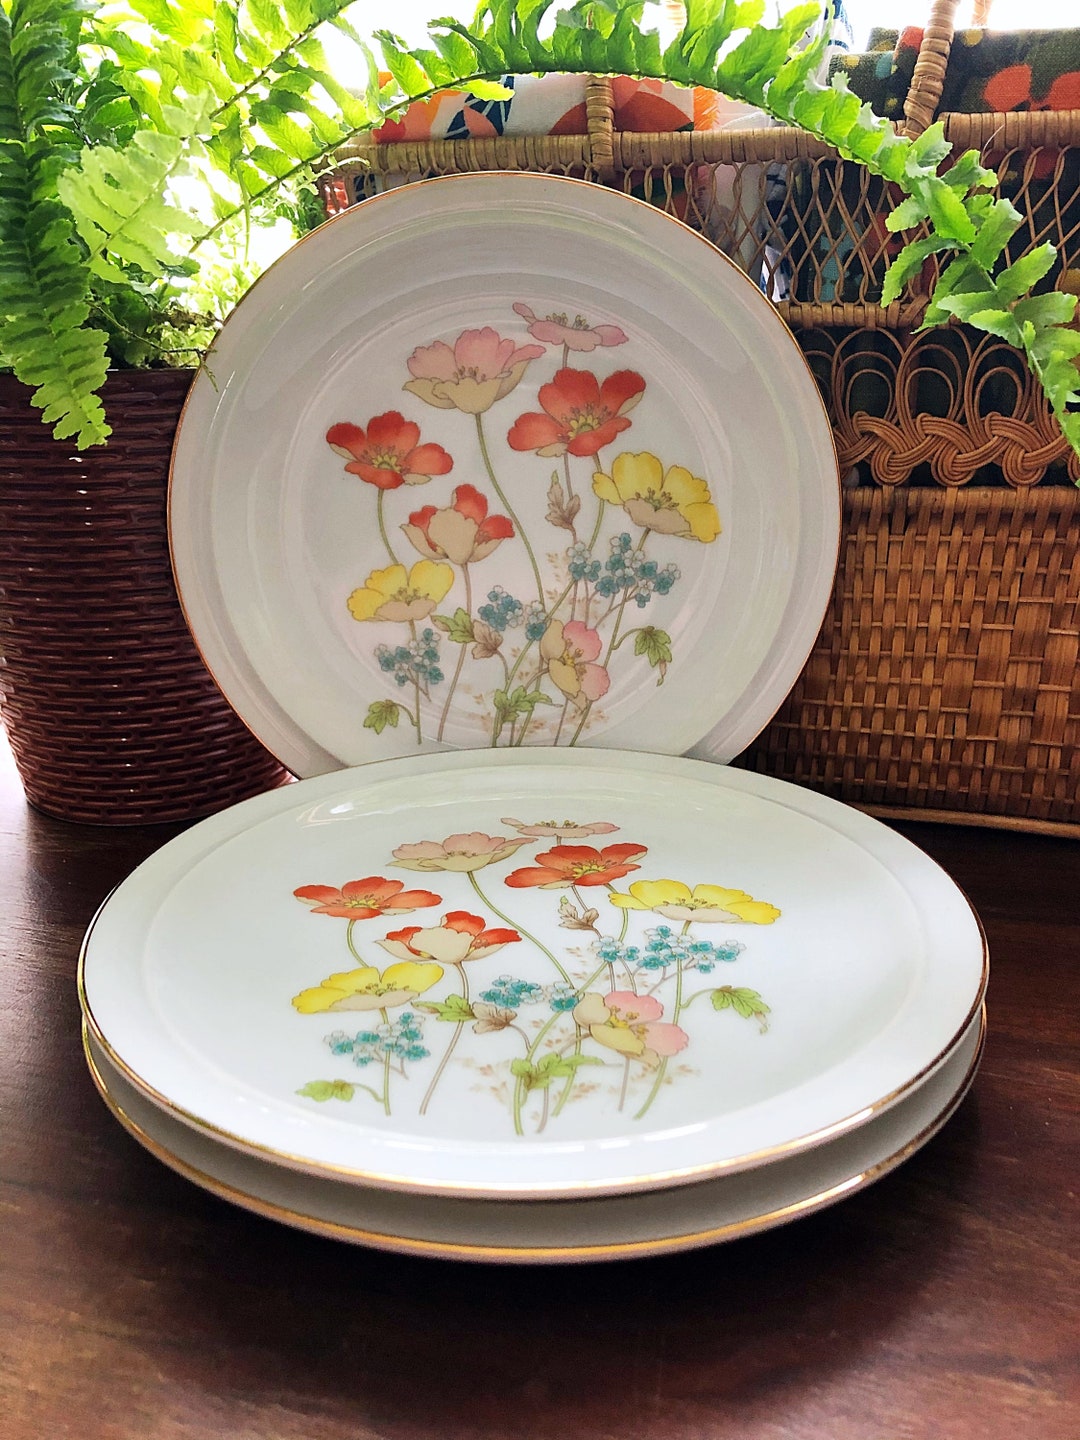 Painted Poppy Plates Fanci Florals Collection From Japan - Etsy